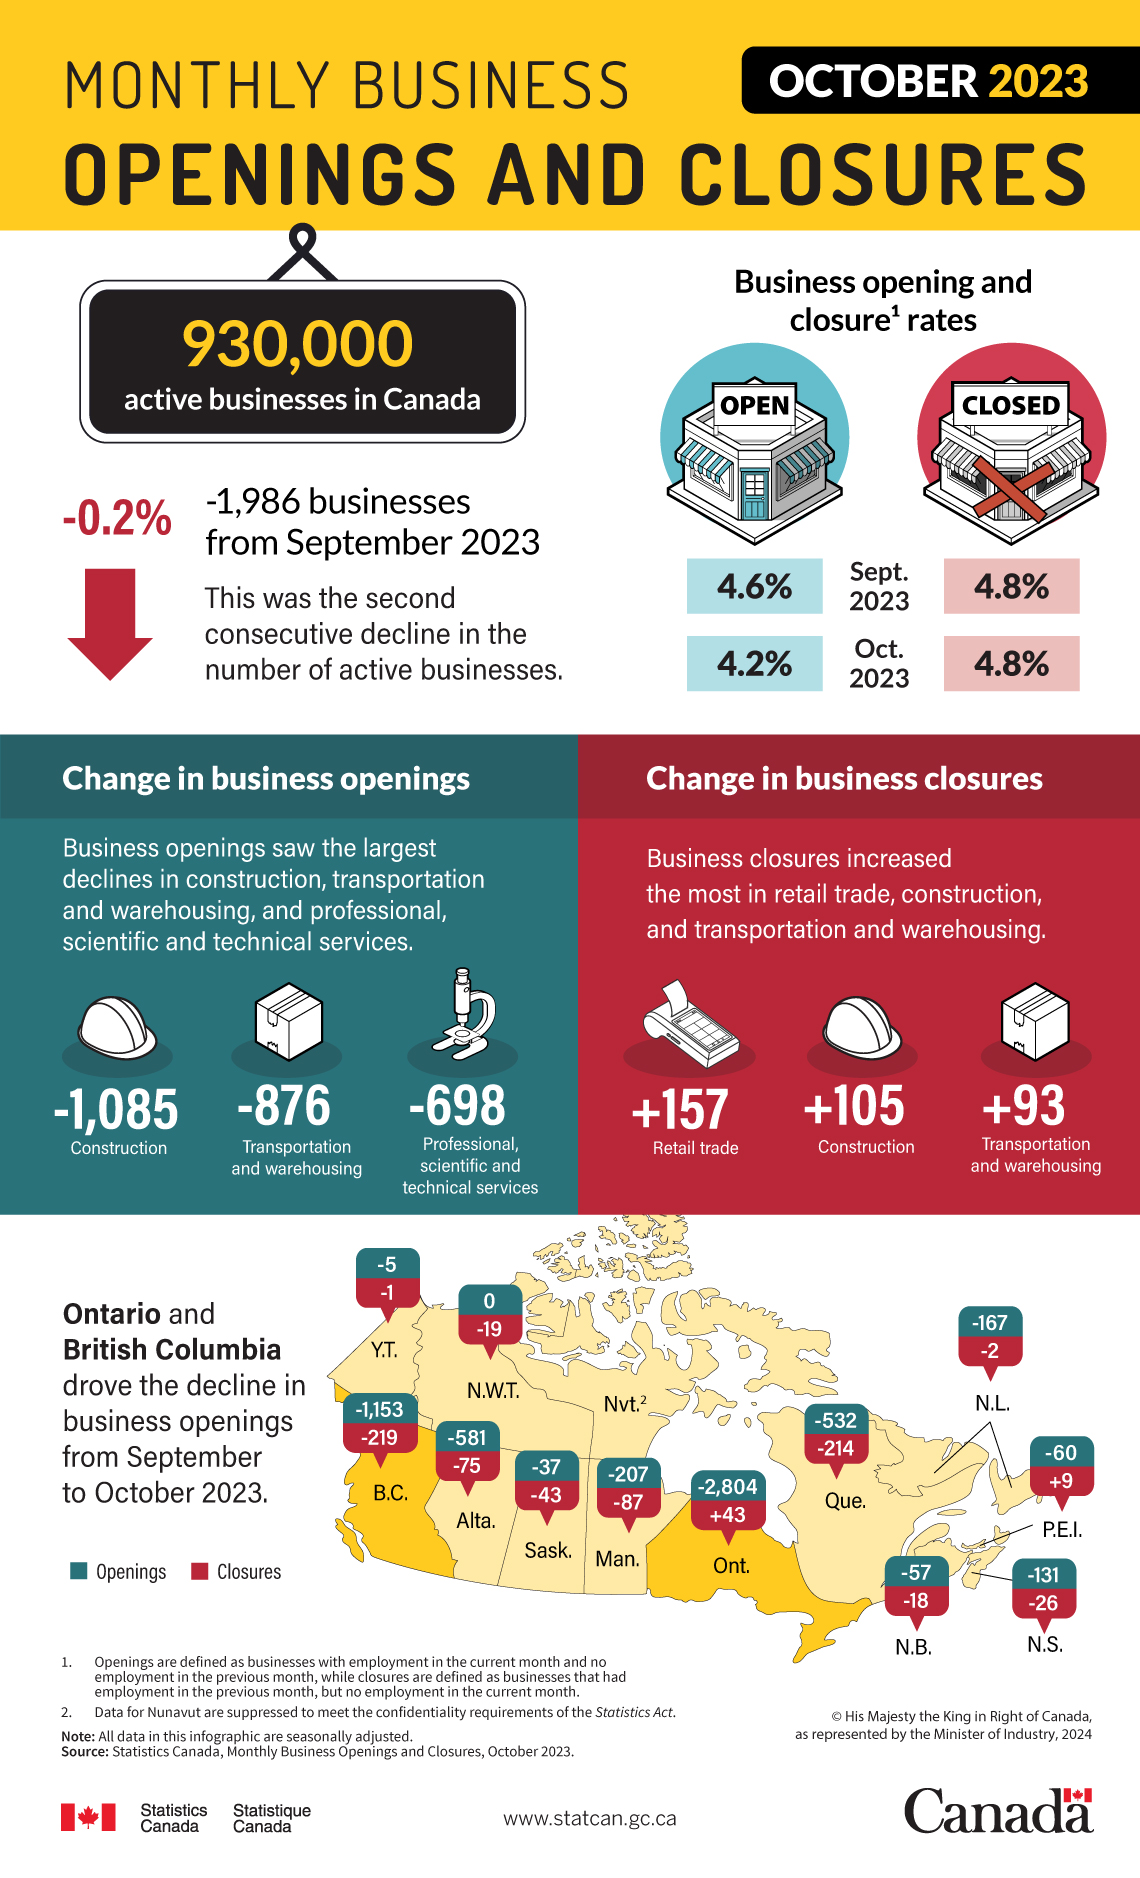 Monthly estimates of business openings and closures, October 2023